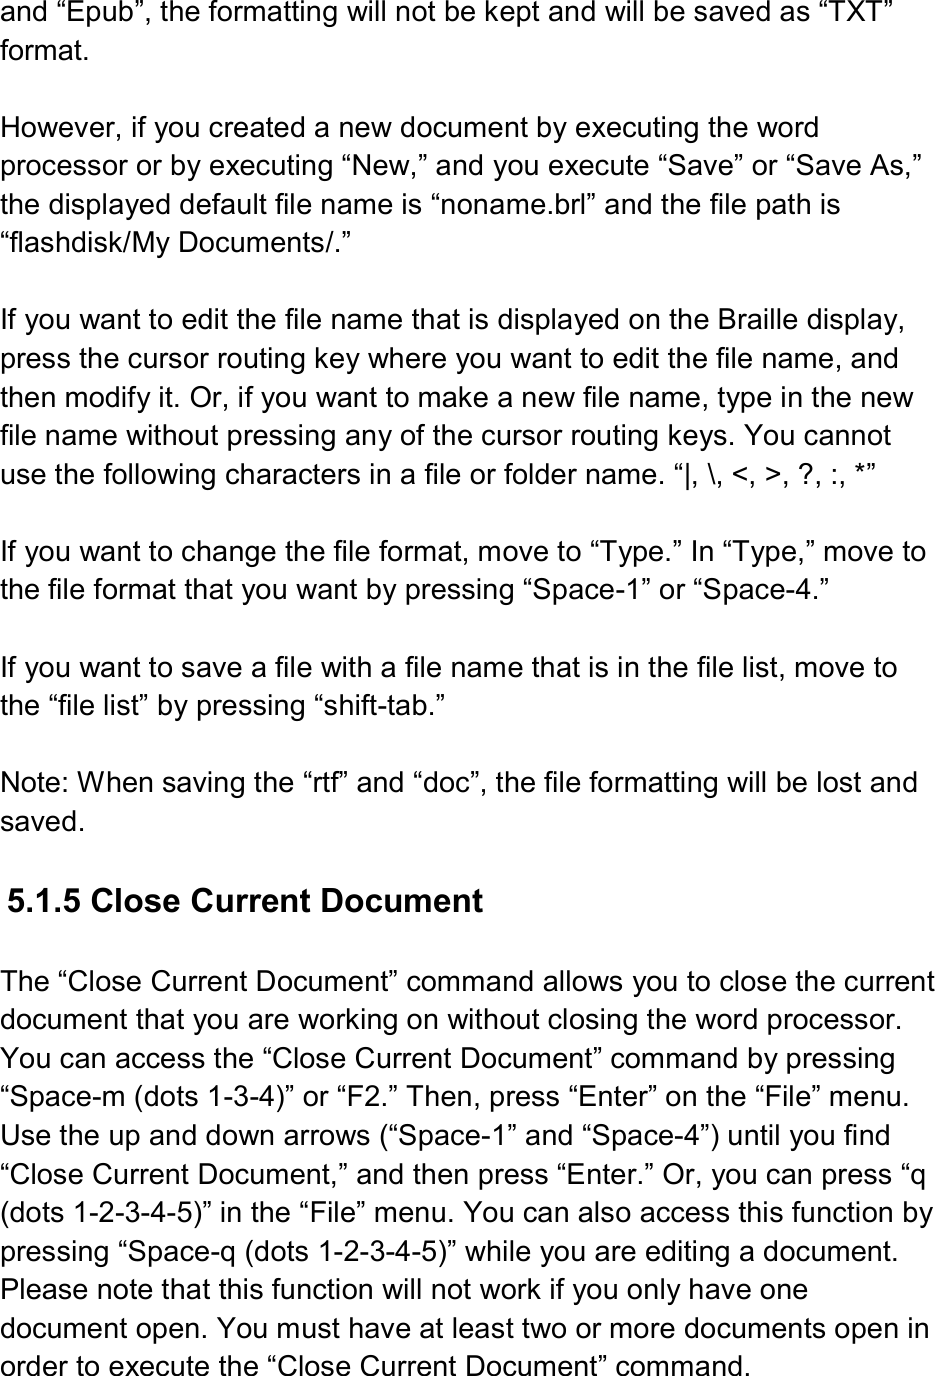  and “Epub”, the formatting will not be kept and will be saved as “TXT” format.    However, if you created a new document by executing the word processor or by executing “New,” and you execute “Save” or “Save As,” the displayed default file name is “noname.brl” and the file path is “flashdisk/My Documents/.”  If you want to edit the file name that is displayed on the Braille display, press the cursor routing key where you want to edit the file name, and then modify it. Or, if you want to make a new file name, type in the new file name without pressing any of the cursor routing keys. You cannot use the following characters in a file or folder name. “|, \, &lt;, &gt;, ?, :, *”  If you want to change the file format, move to “Type.” In “Type,” move to the file format that you want by pressing “Space-1” or “Space-4.”  If you want to save a file with a file name that is in the file list, move to the “file list” by pressing “shift-tab.”    Note: When saving the “rtf” and “doc”, the file formatting will be lost and saved.    5.1.5 Close Current Document  The “Close Current Document” command allows you to close the current document that you are working on without closing the word processor. You can access the “Close Current Document” command by pressing “Space-m (dots 1-3-4)” or “F2.” Then, press “Enter” on the “File” menu. Use the up and down arrows (“Space-1” and “Space-4”) until you find “Close Current Document,” and then press “Enter.” Or, you can press “q (dots 1-2-3-4-5)” in the “File” menu. You can also access this function by pressing “Space-q (dots 1-2-3-4-5)” while you are editing a document. Please note that this function will not work if you only have one document open. You must have at least two or more documents open in order to execute the “Close Current Document” command. 